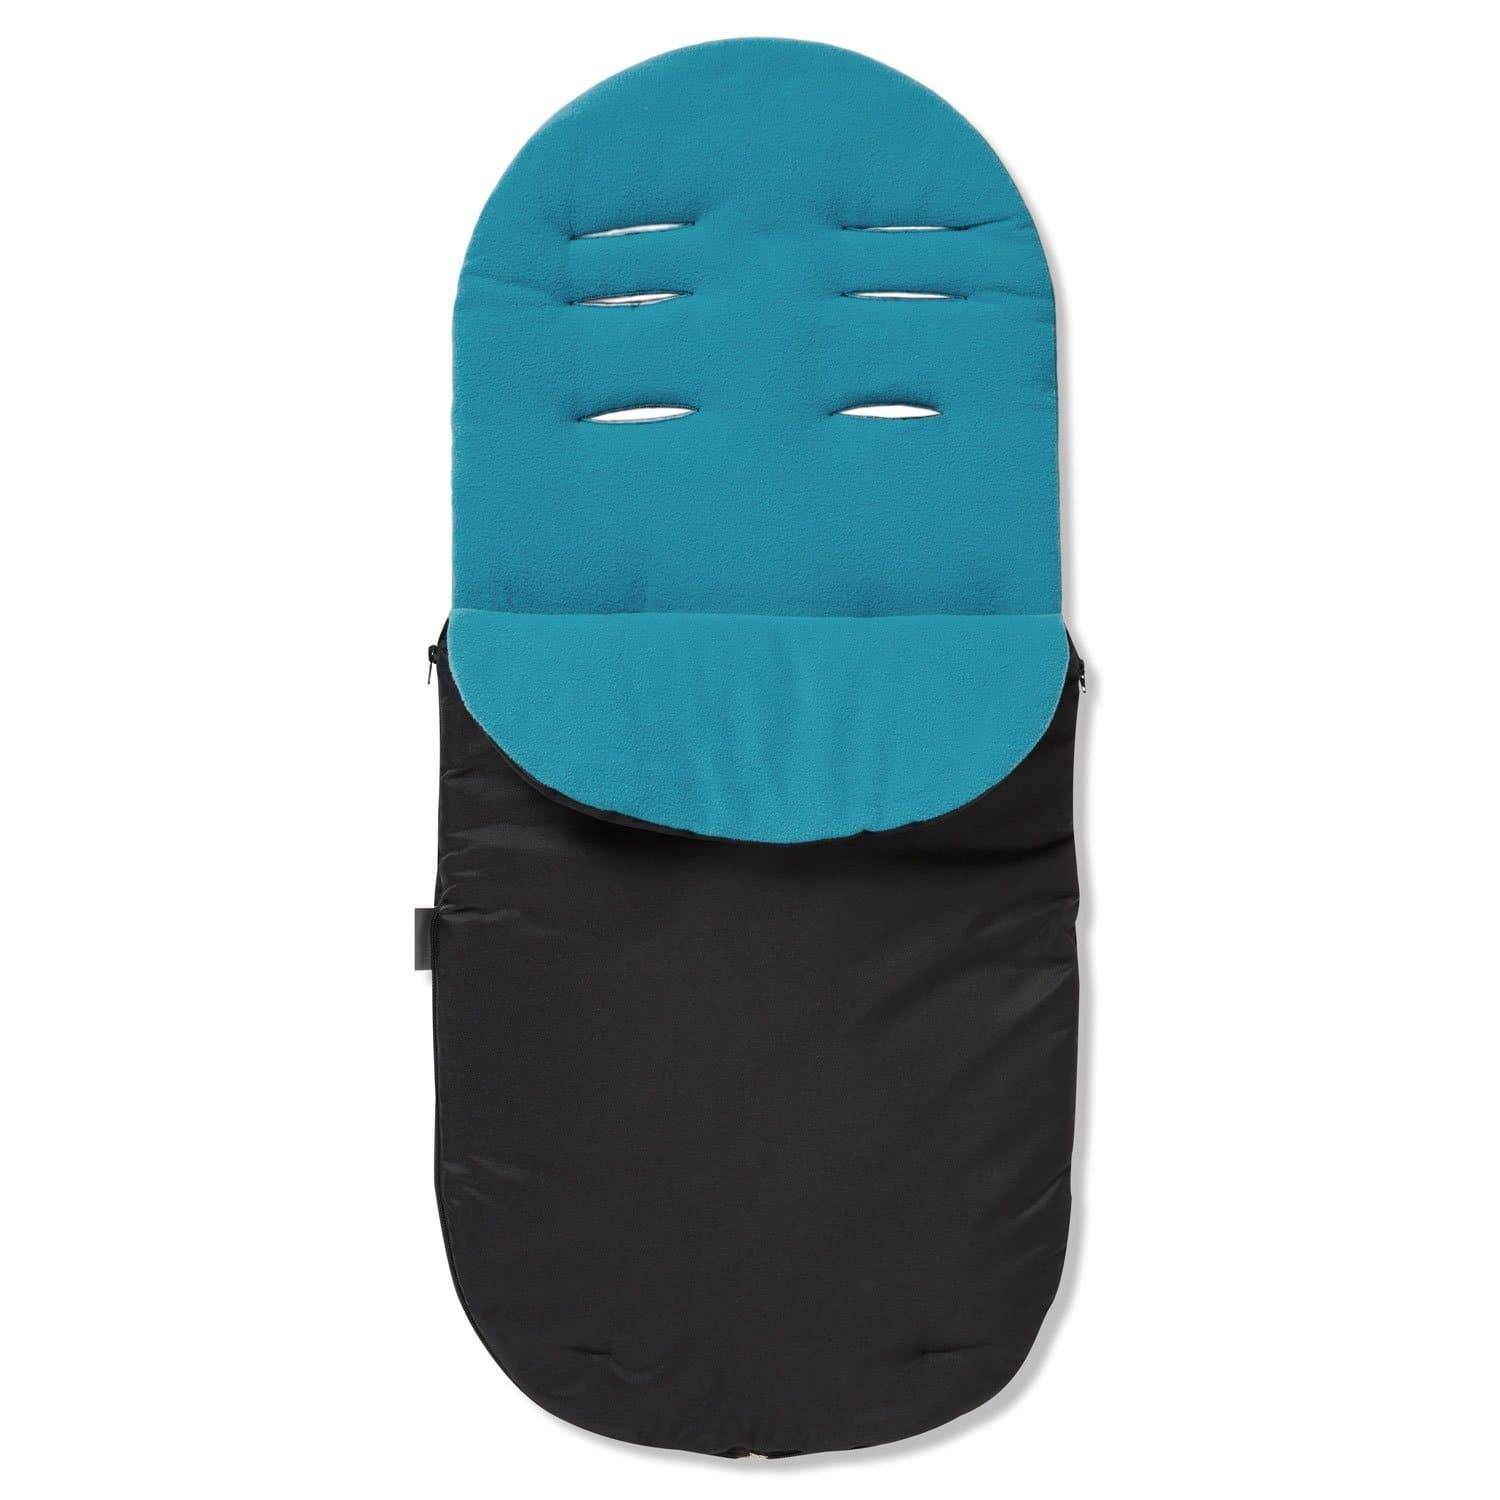 Footmuff / Cosy Toes Compatible with Britax - Turquoise / Fits All Models | For Your Little One